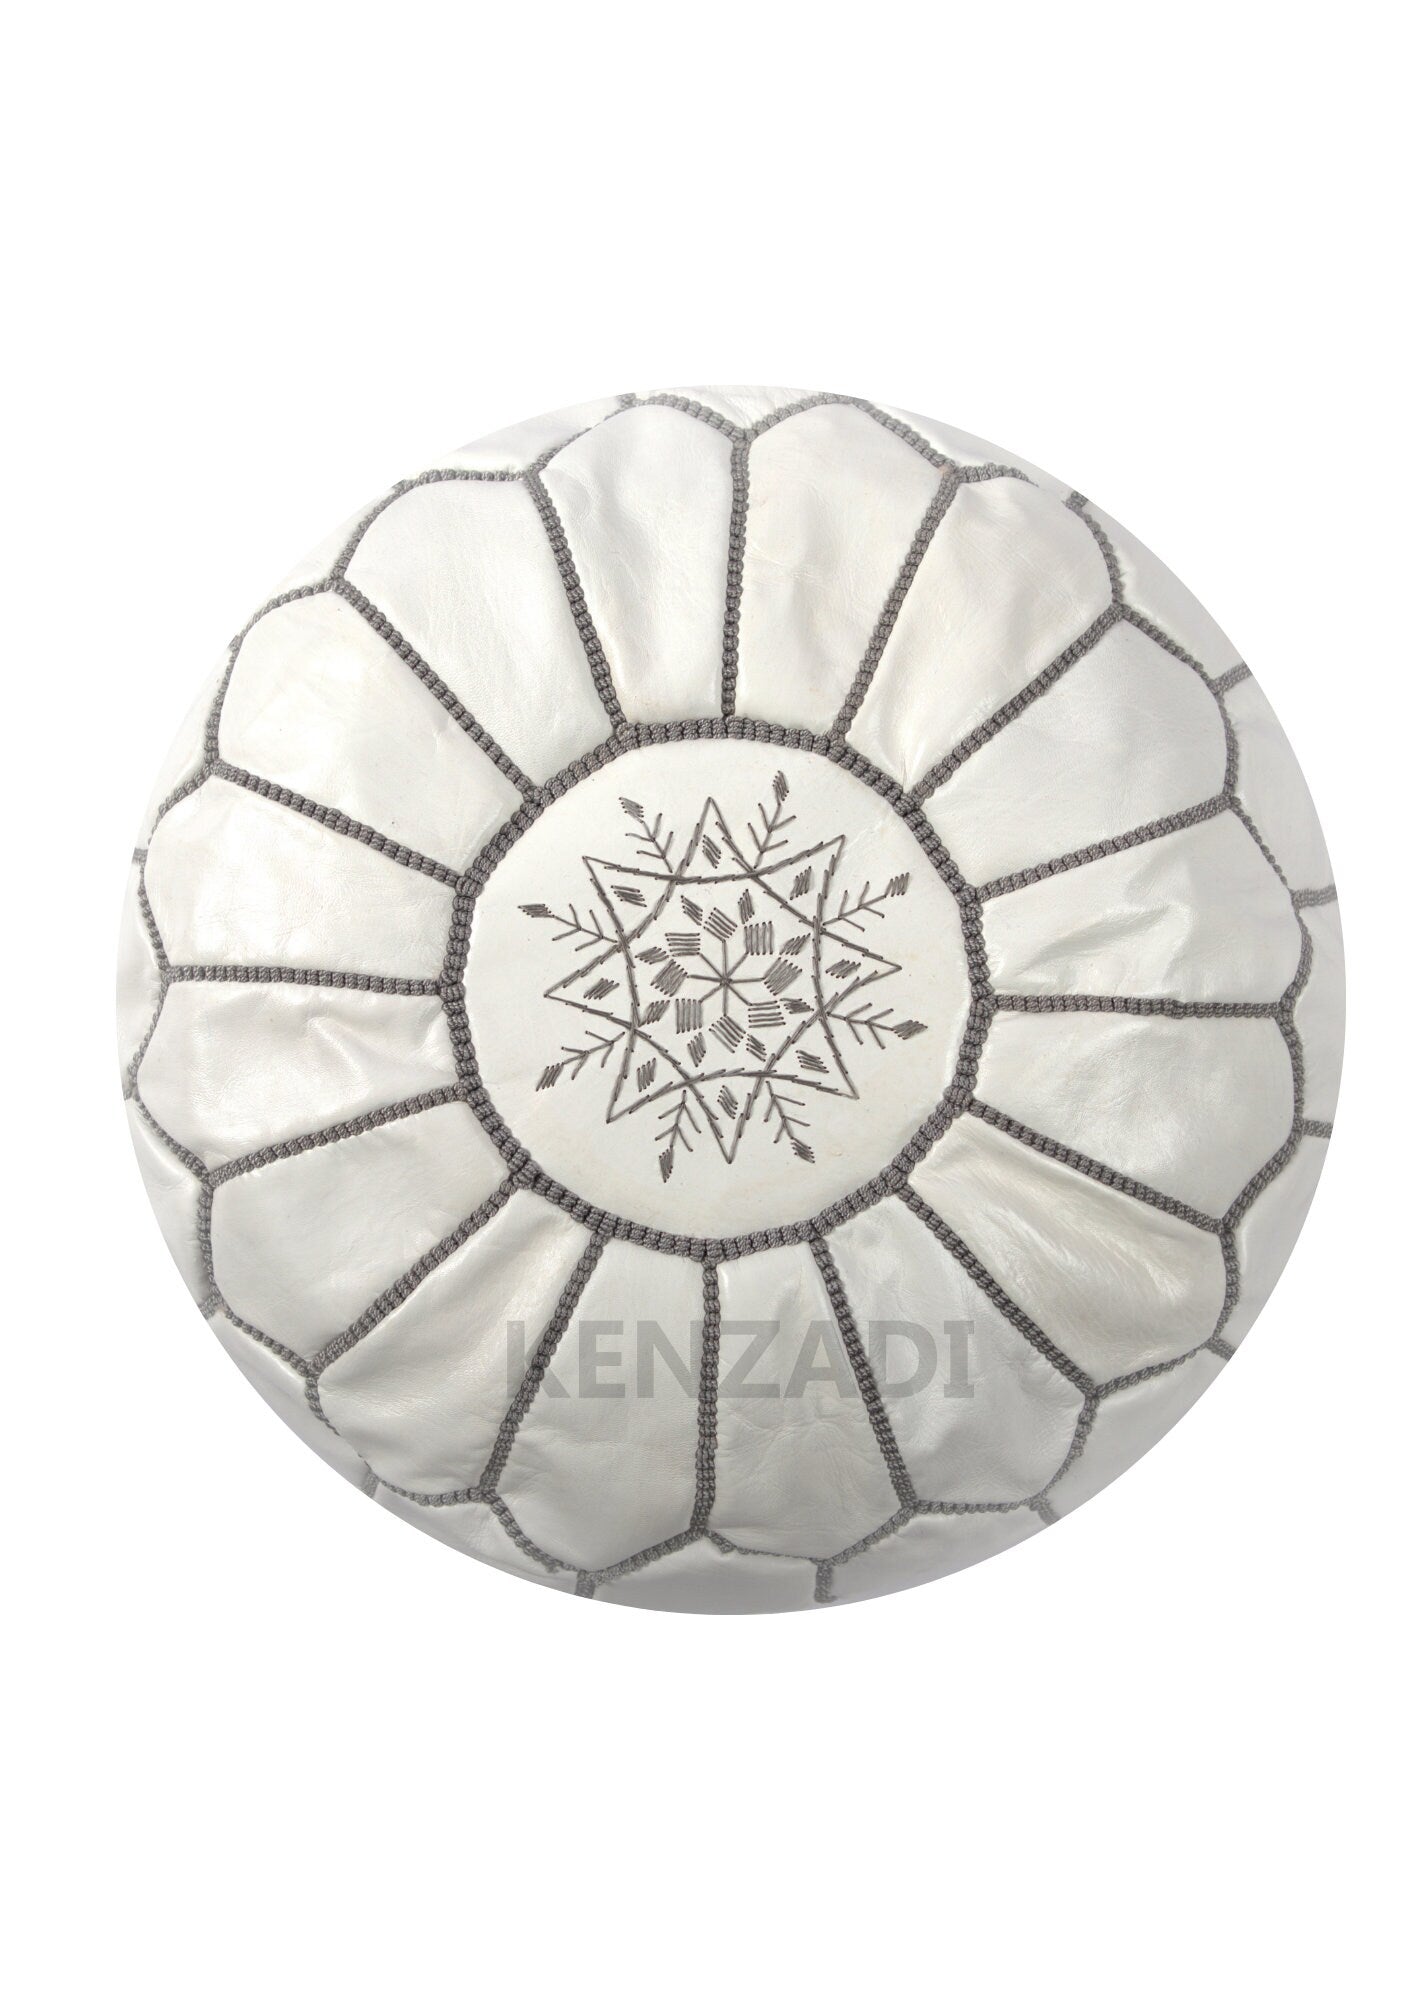 Authentic Moroccan pouf in sewn TAN leather, White Pouf with Grey embroidery - Hand-sewn leather pouf for a bohemian touch to your home décor